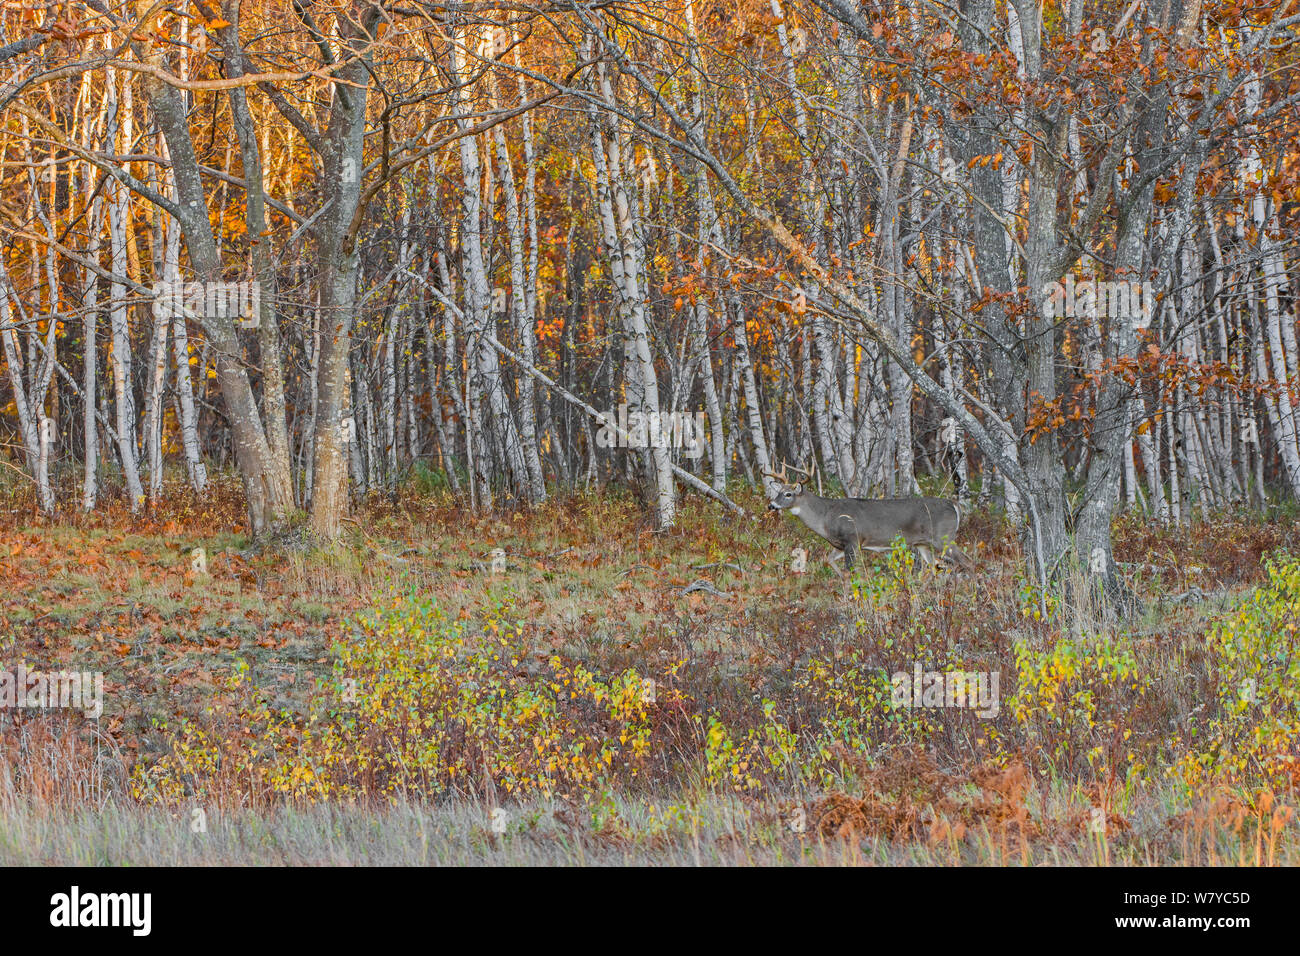 White-tailed deer (Odocoileus virginianus) male in front of autumn forest, Acadia National Park, Maine, USA, October. Stock Photo